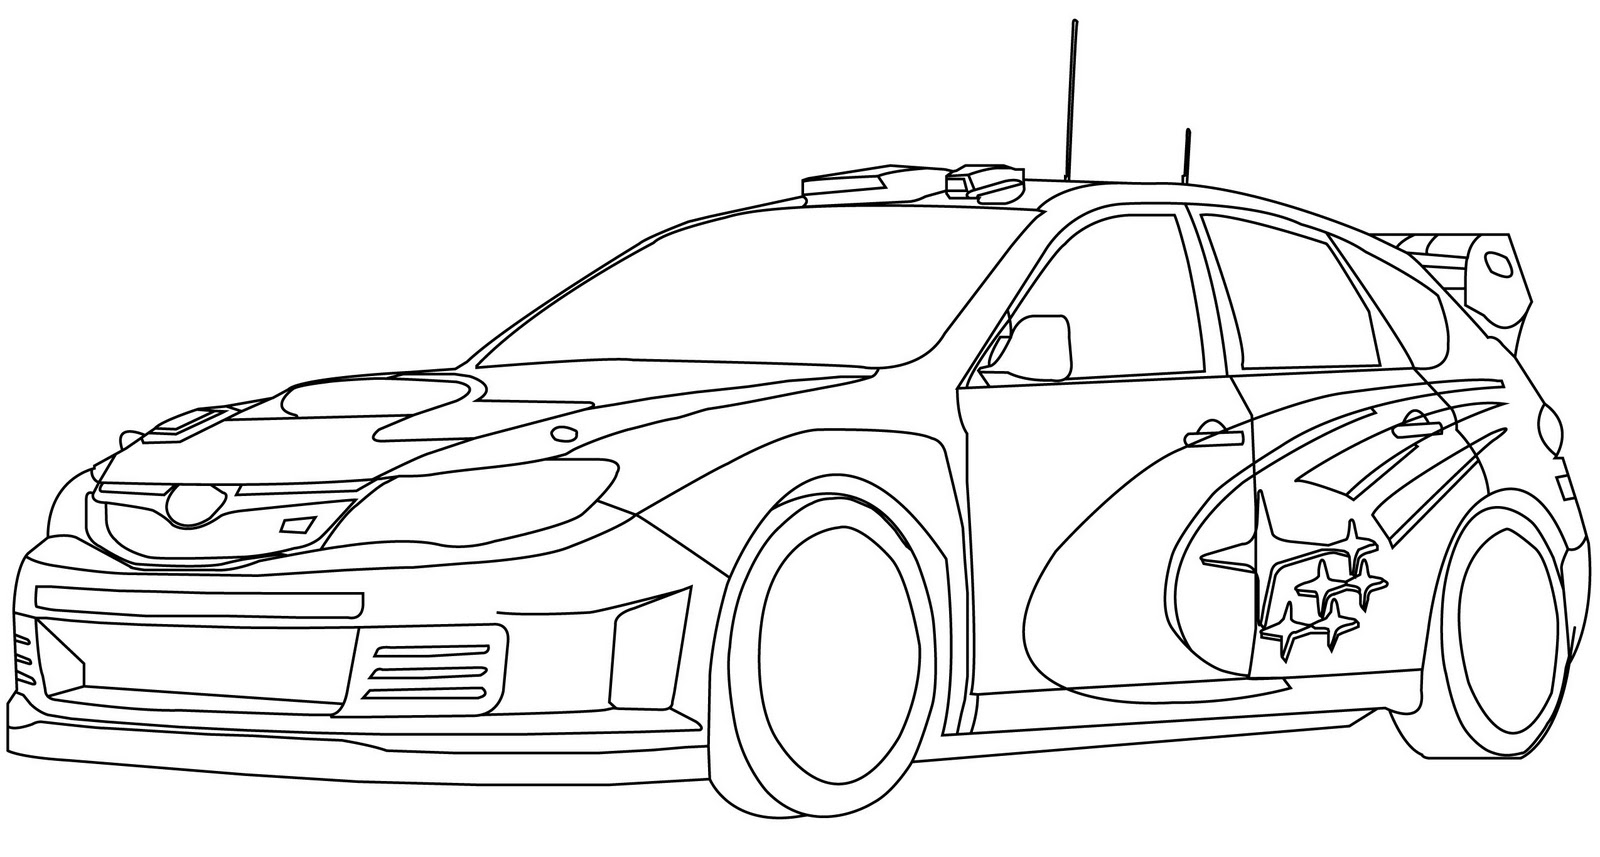 Share 68+ images subaru coloring pages - in.thptnvk.edu.vn